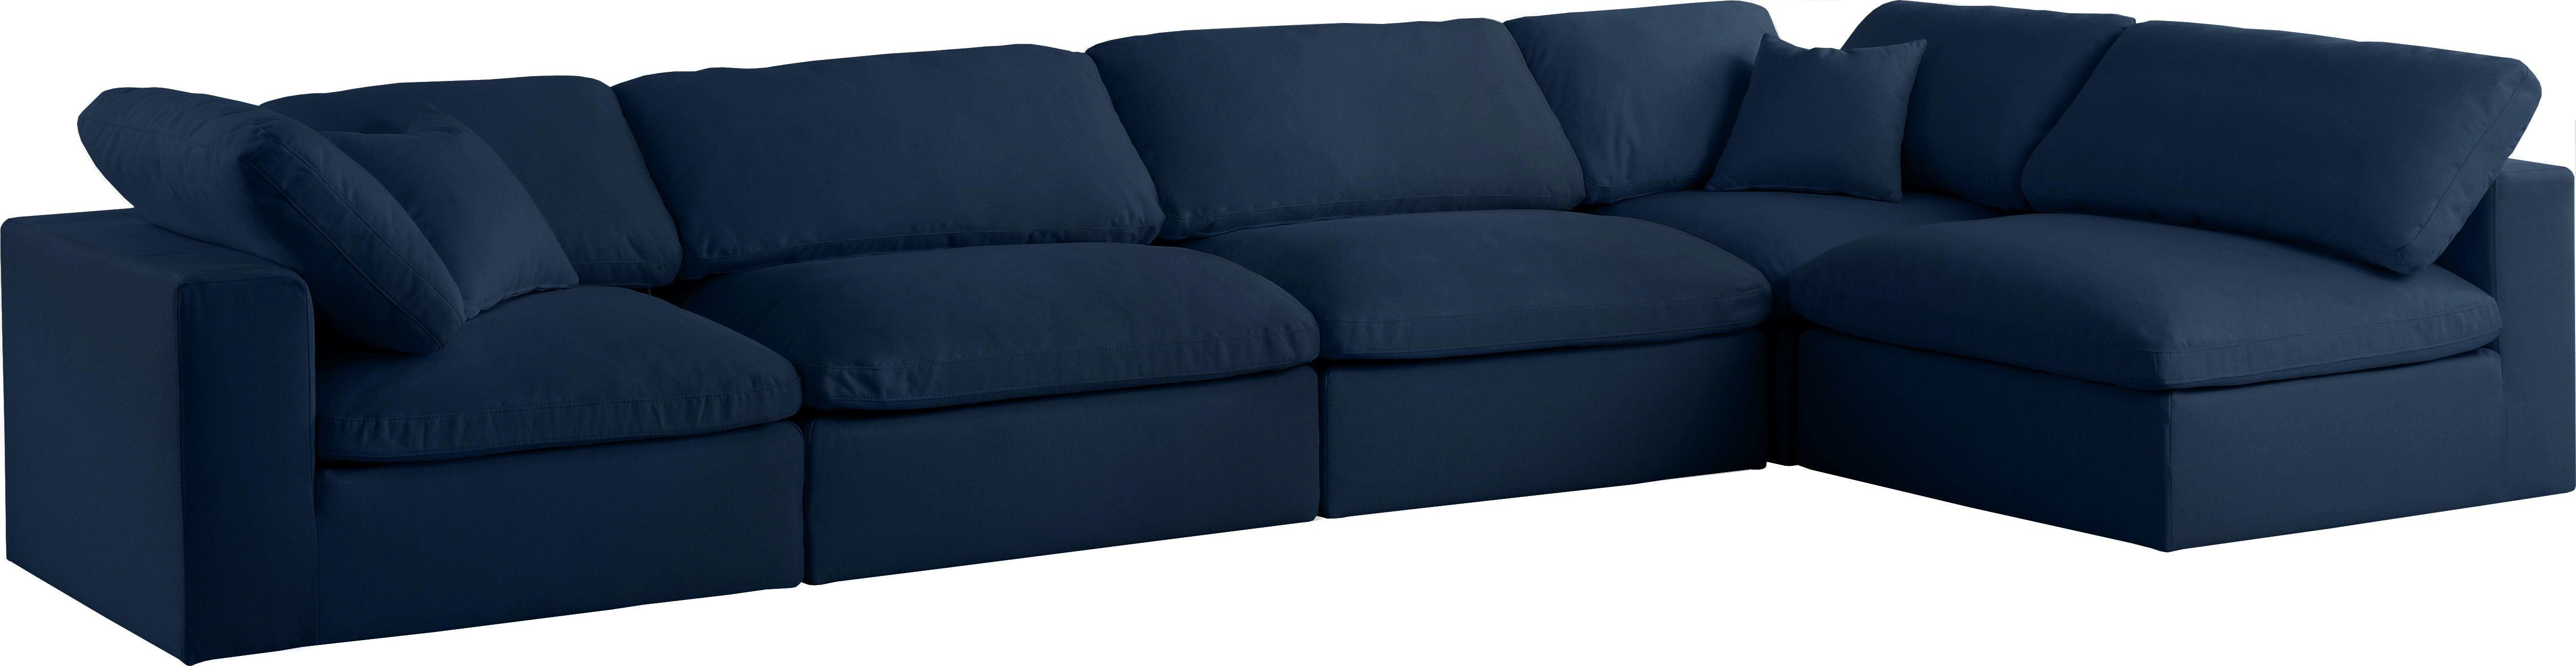 Meridian Furniture - Serene - Linen Textured Fabric Deluxe Comfort Modular Sectional 5 Piece - Navy - Fabric - 5th Avenue Furniture